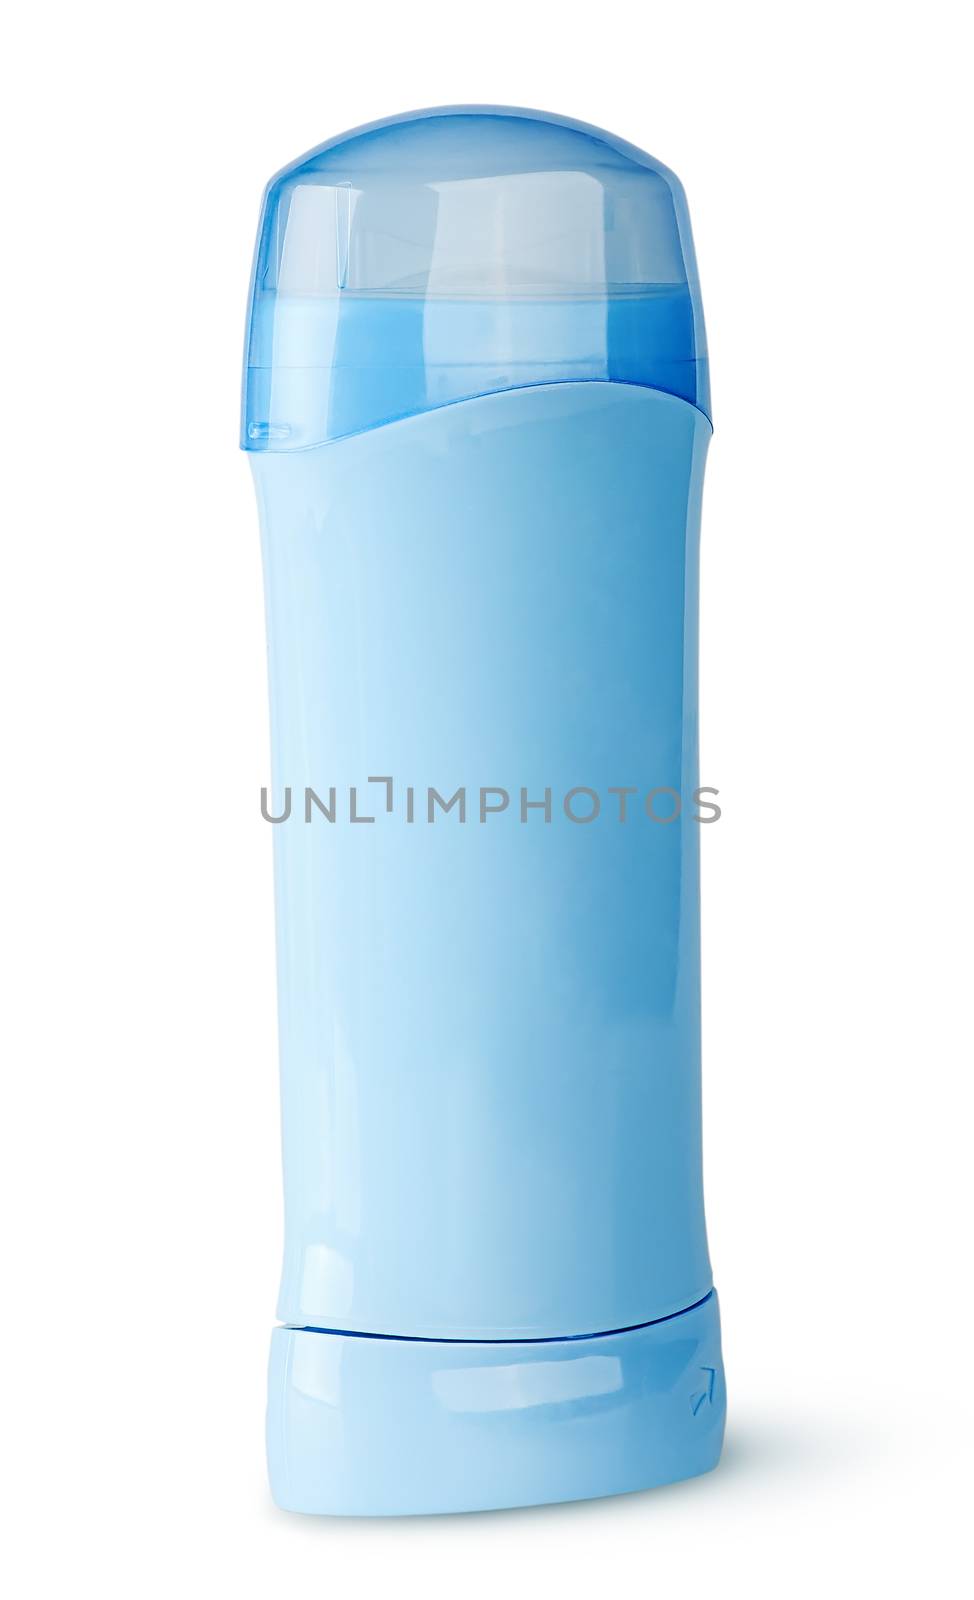 Blue deodorant container rotated by Cipariss